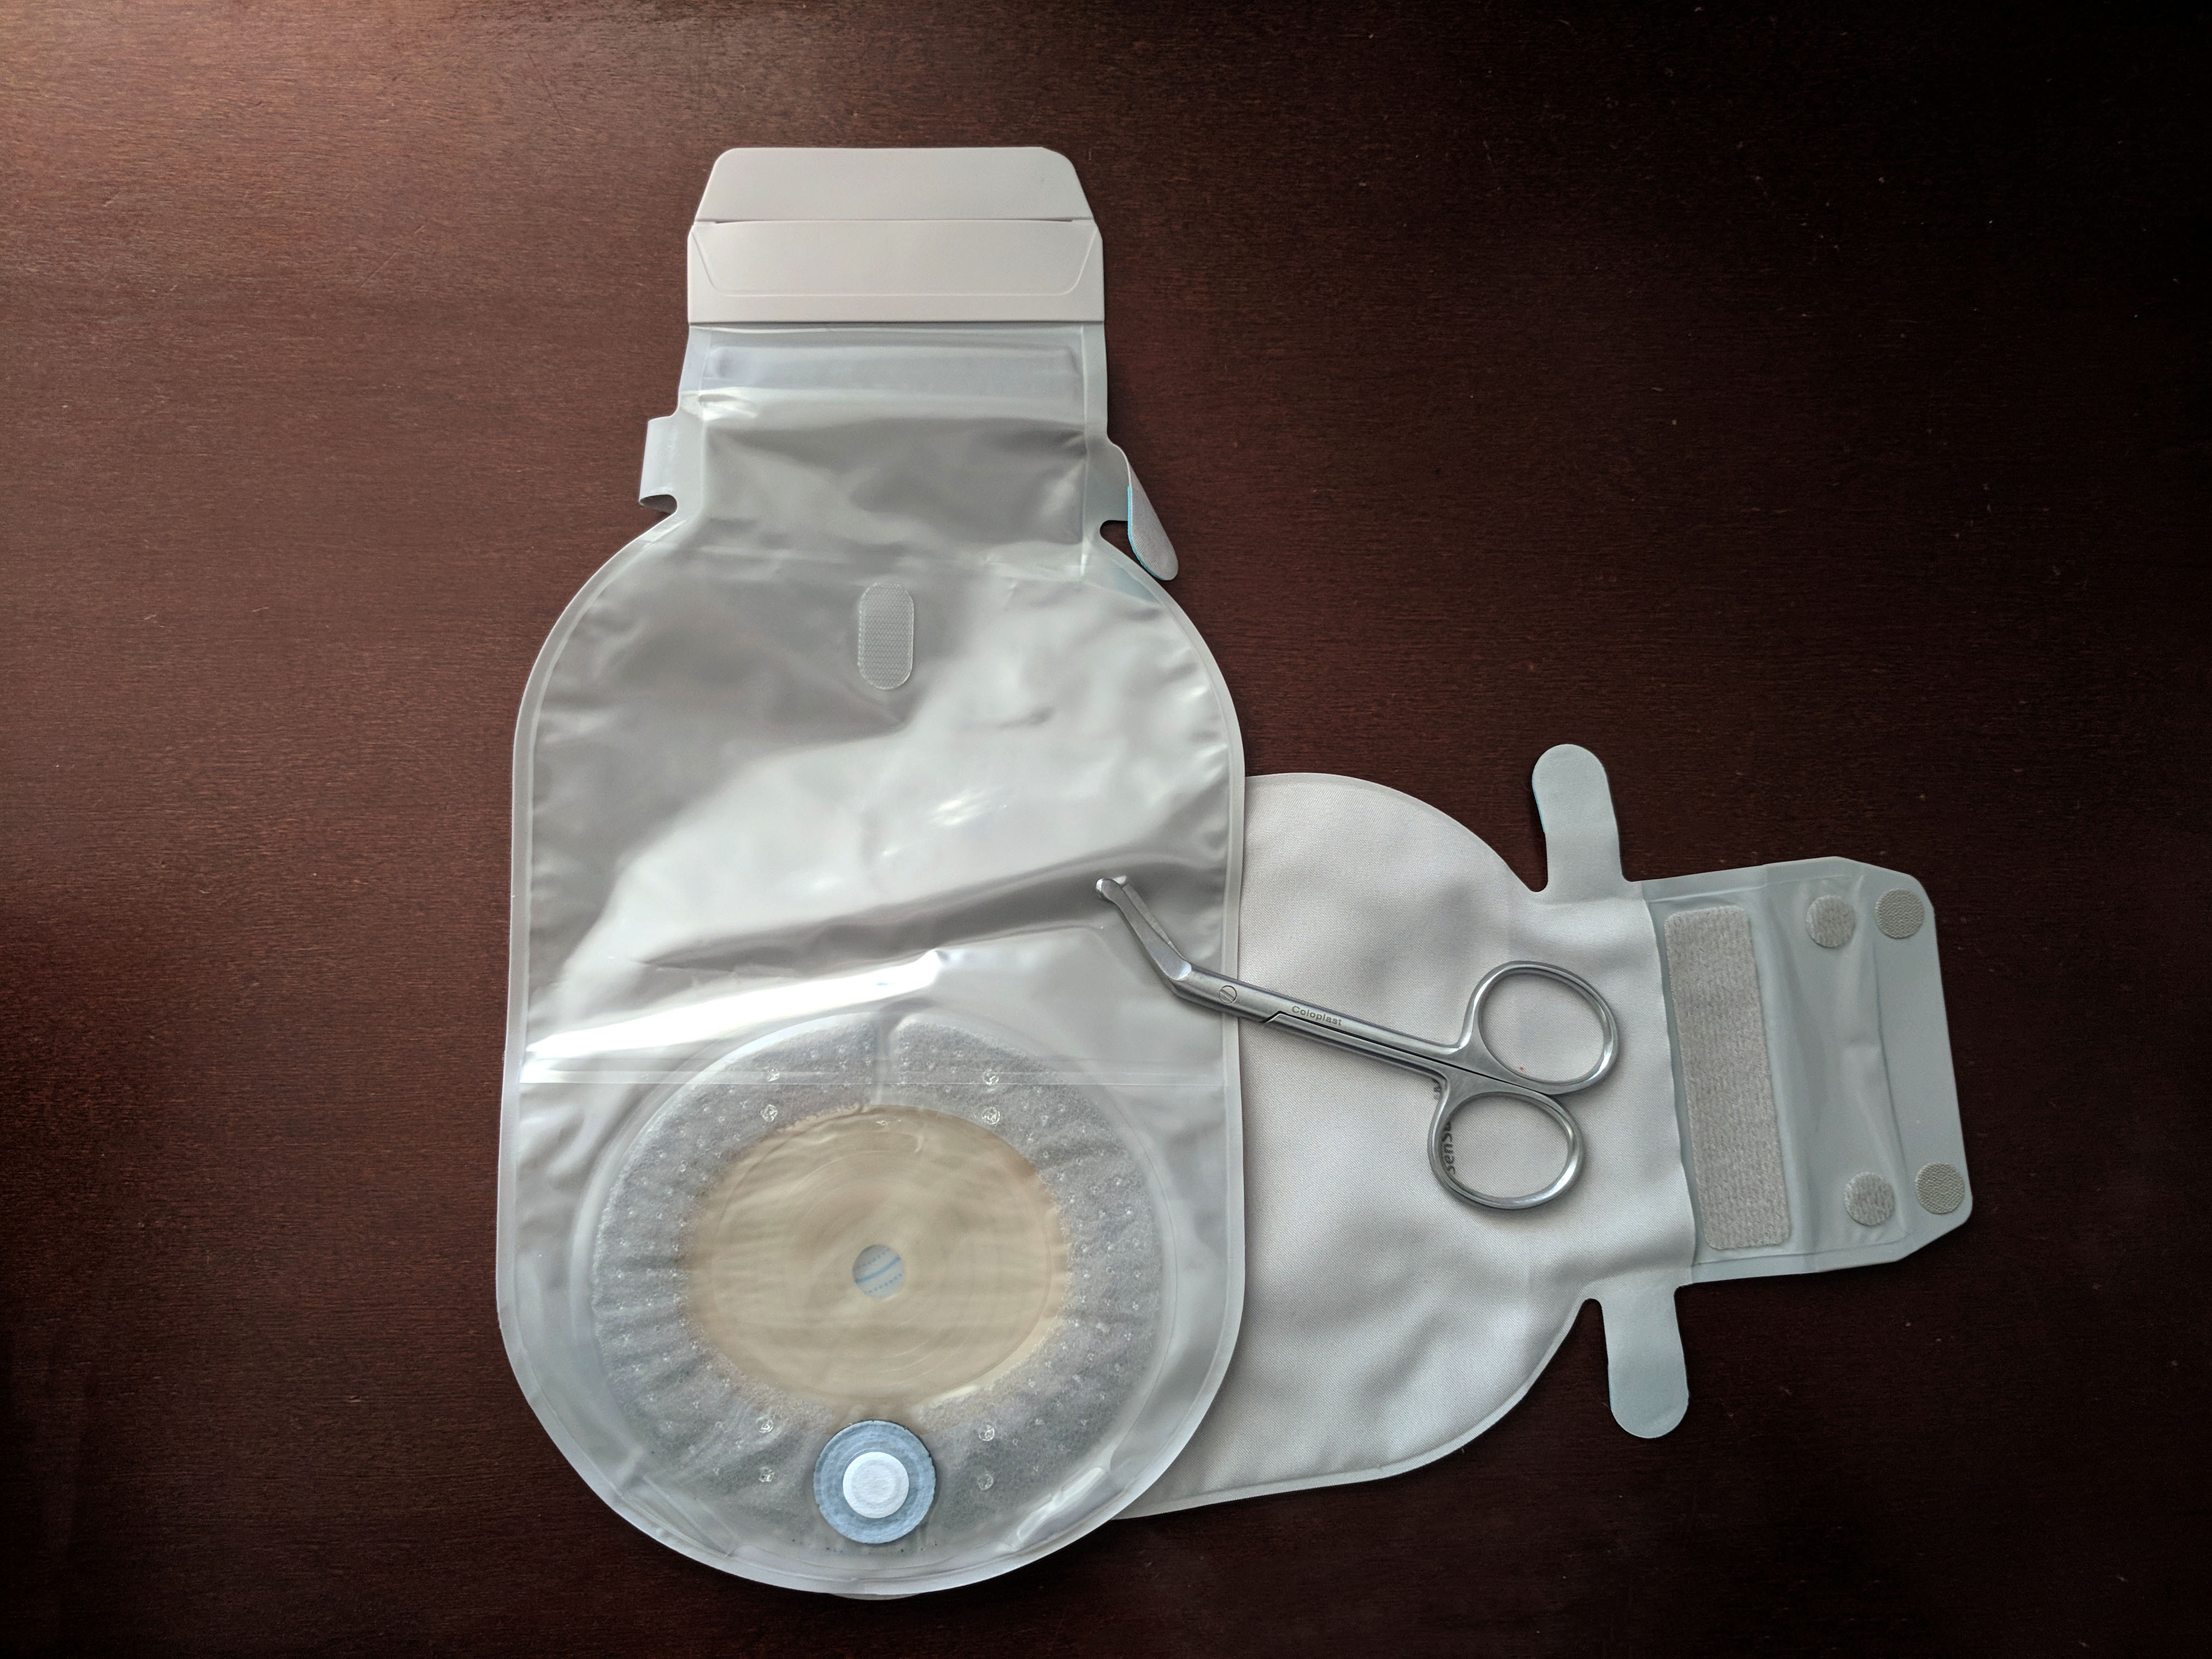 Ostomy Care: How To Properly Drain Ostomy Pouches - My Care Supplies